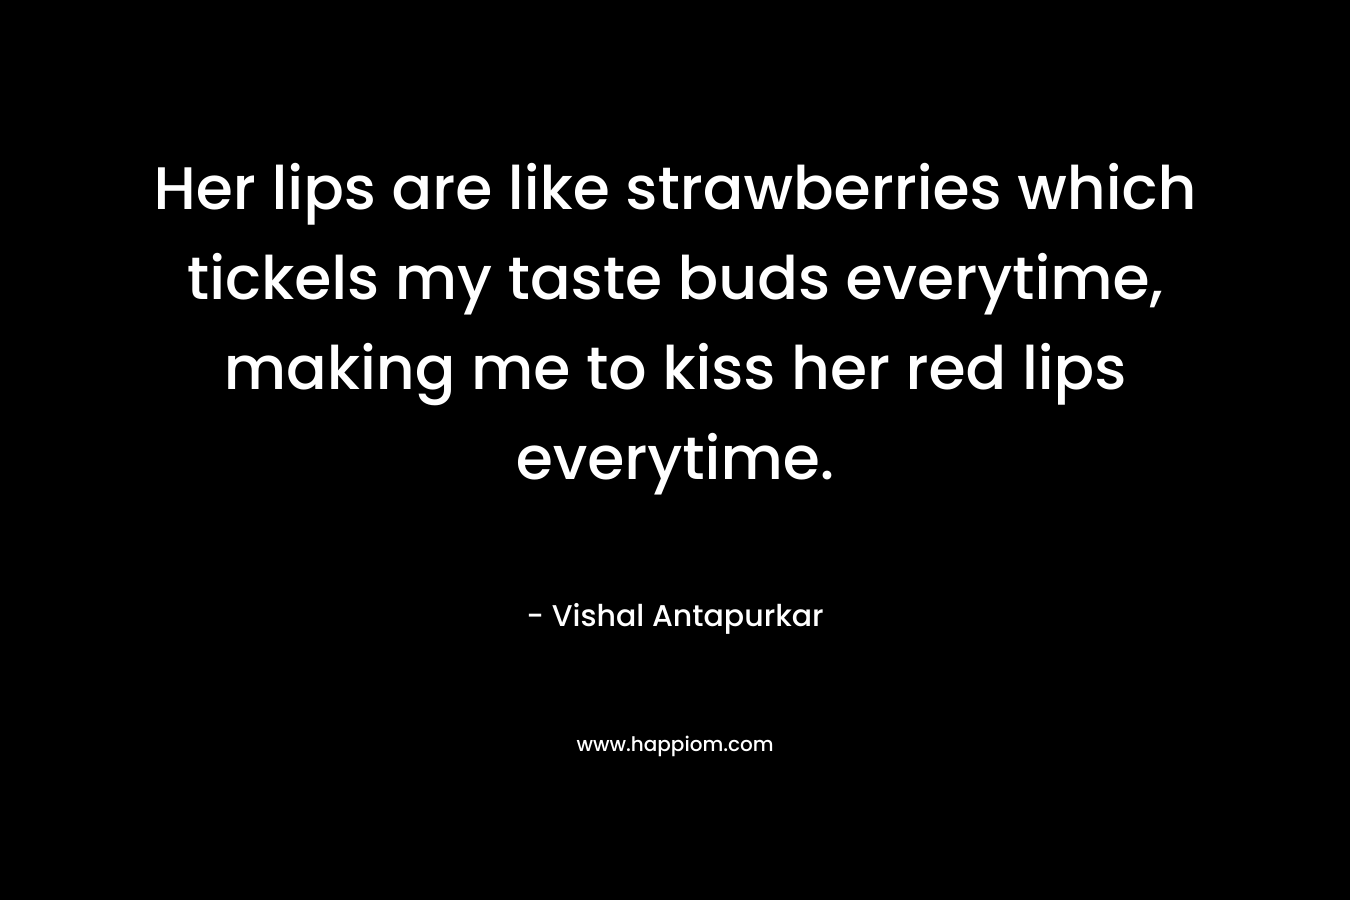 Her lips are like strawberries which tickels my taste buds everytime, making me to kiss her red lips everytime. – Vishal Antapurkar